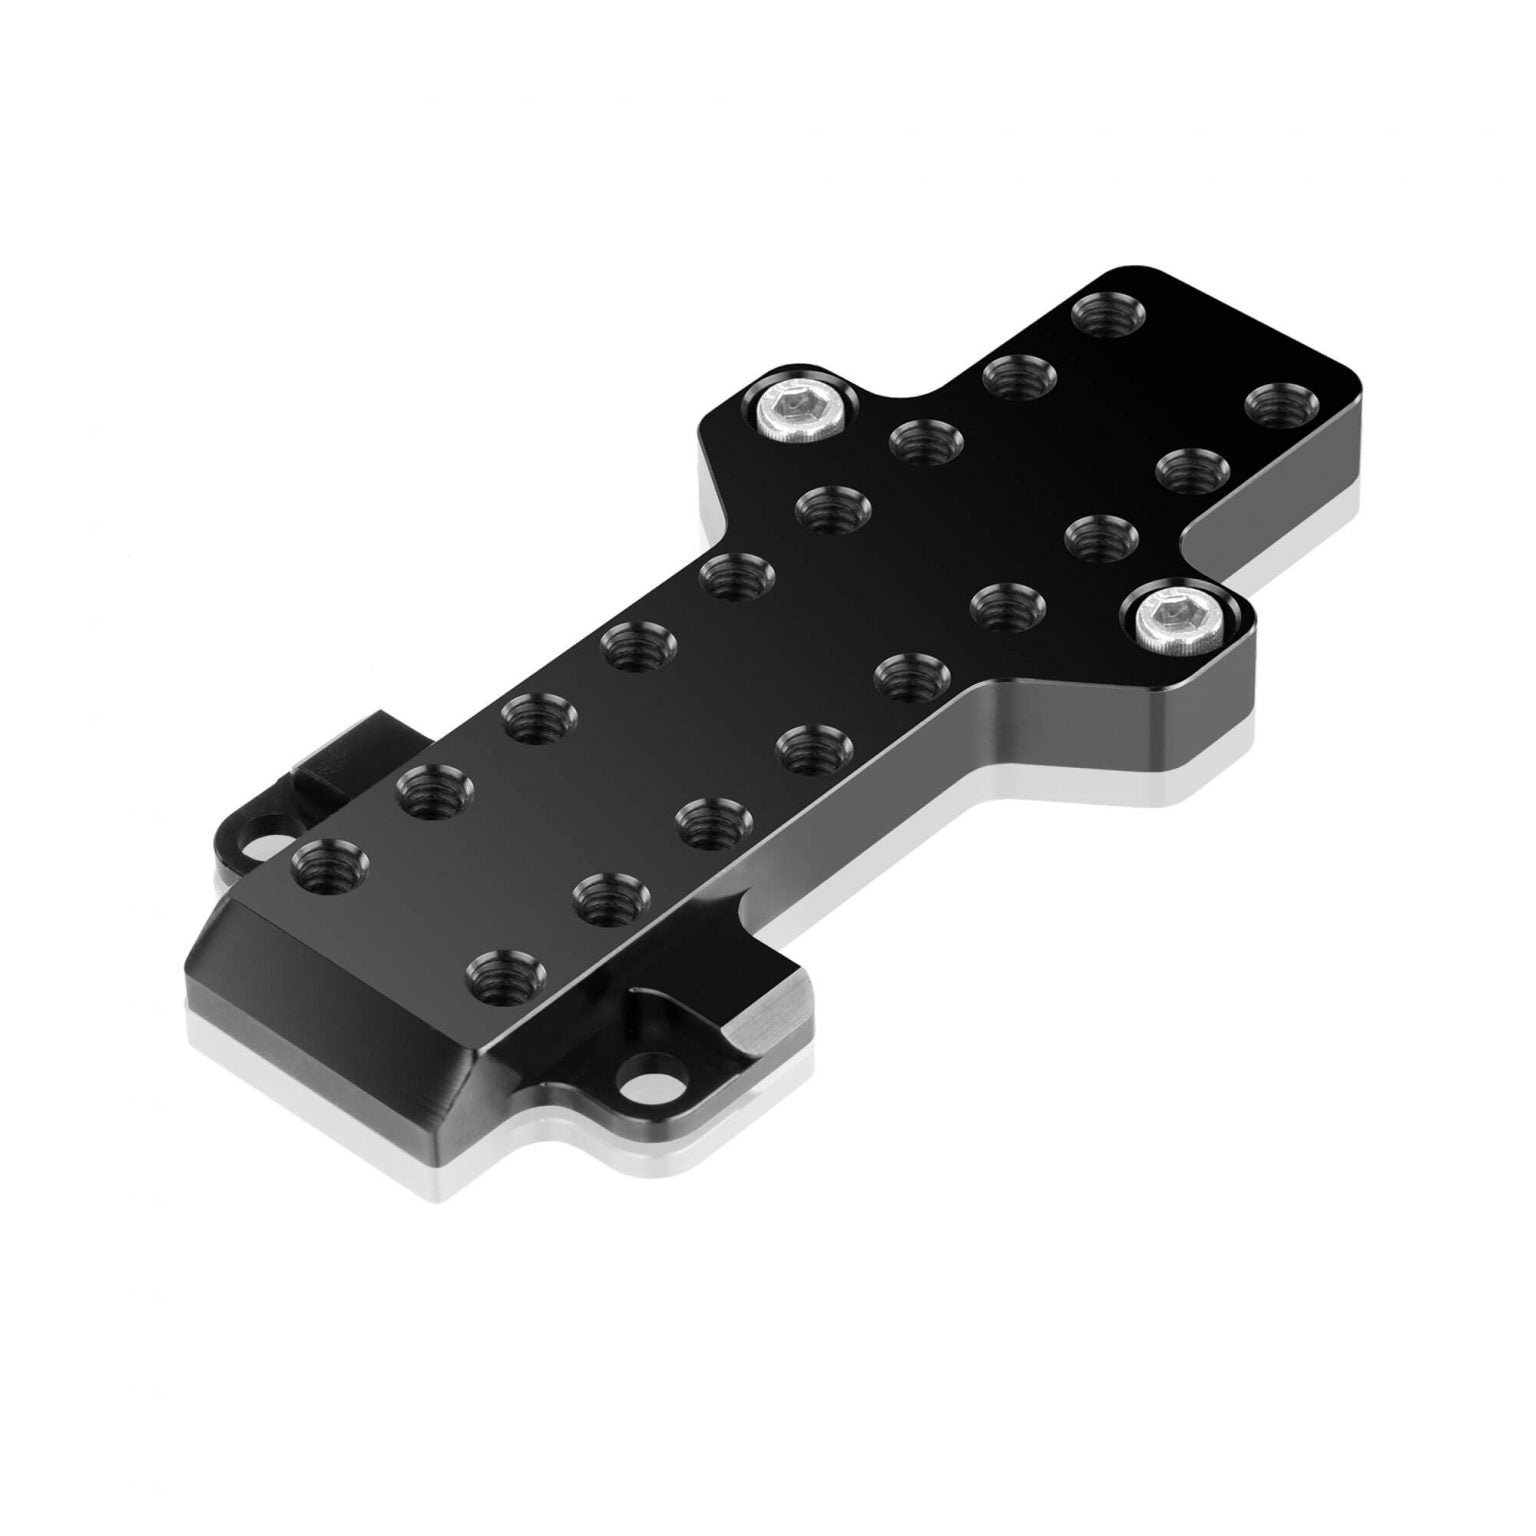 SHAPE Top Handle Adapter Plate for Sony FX9 - SHAPE wlb